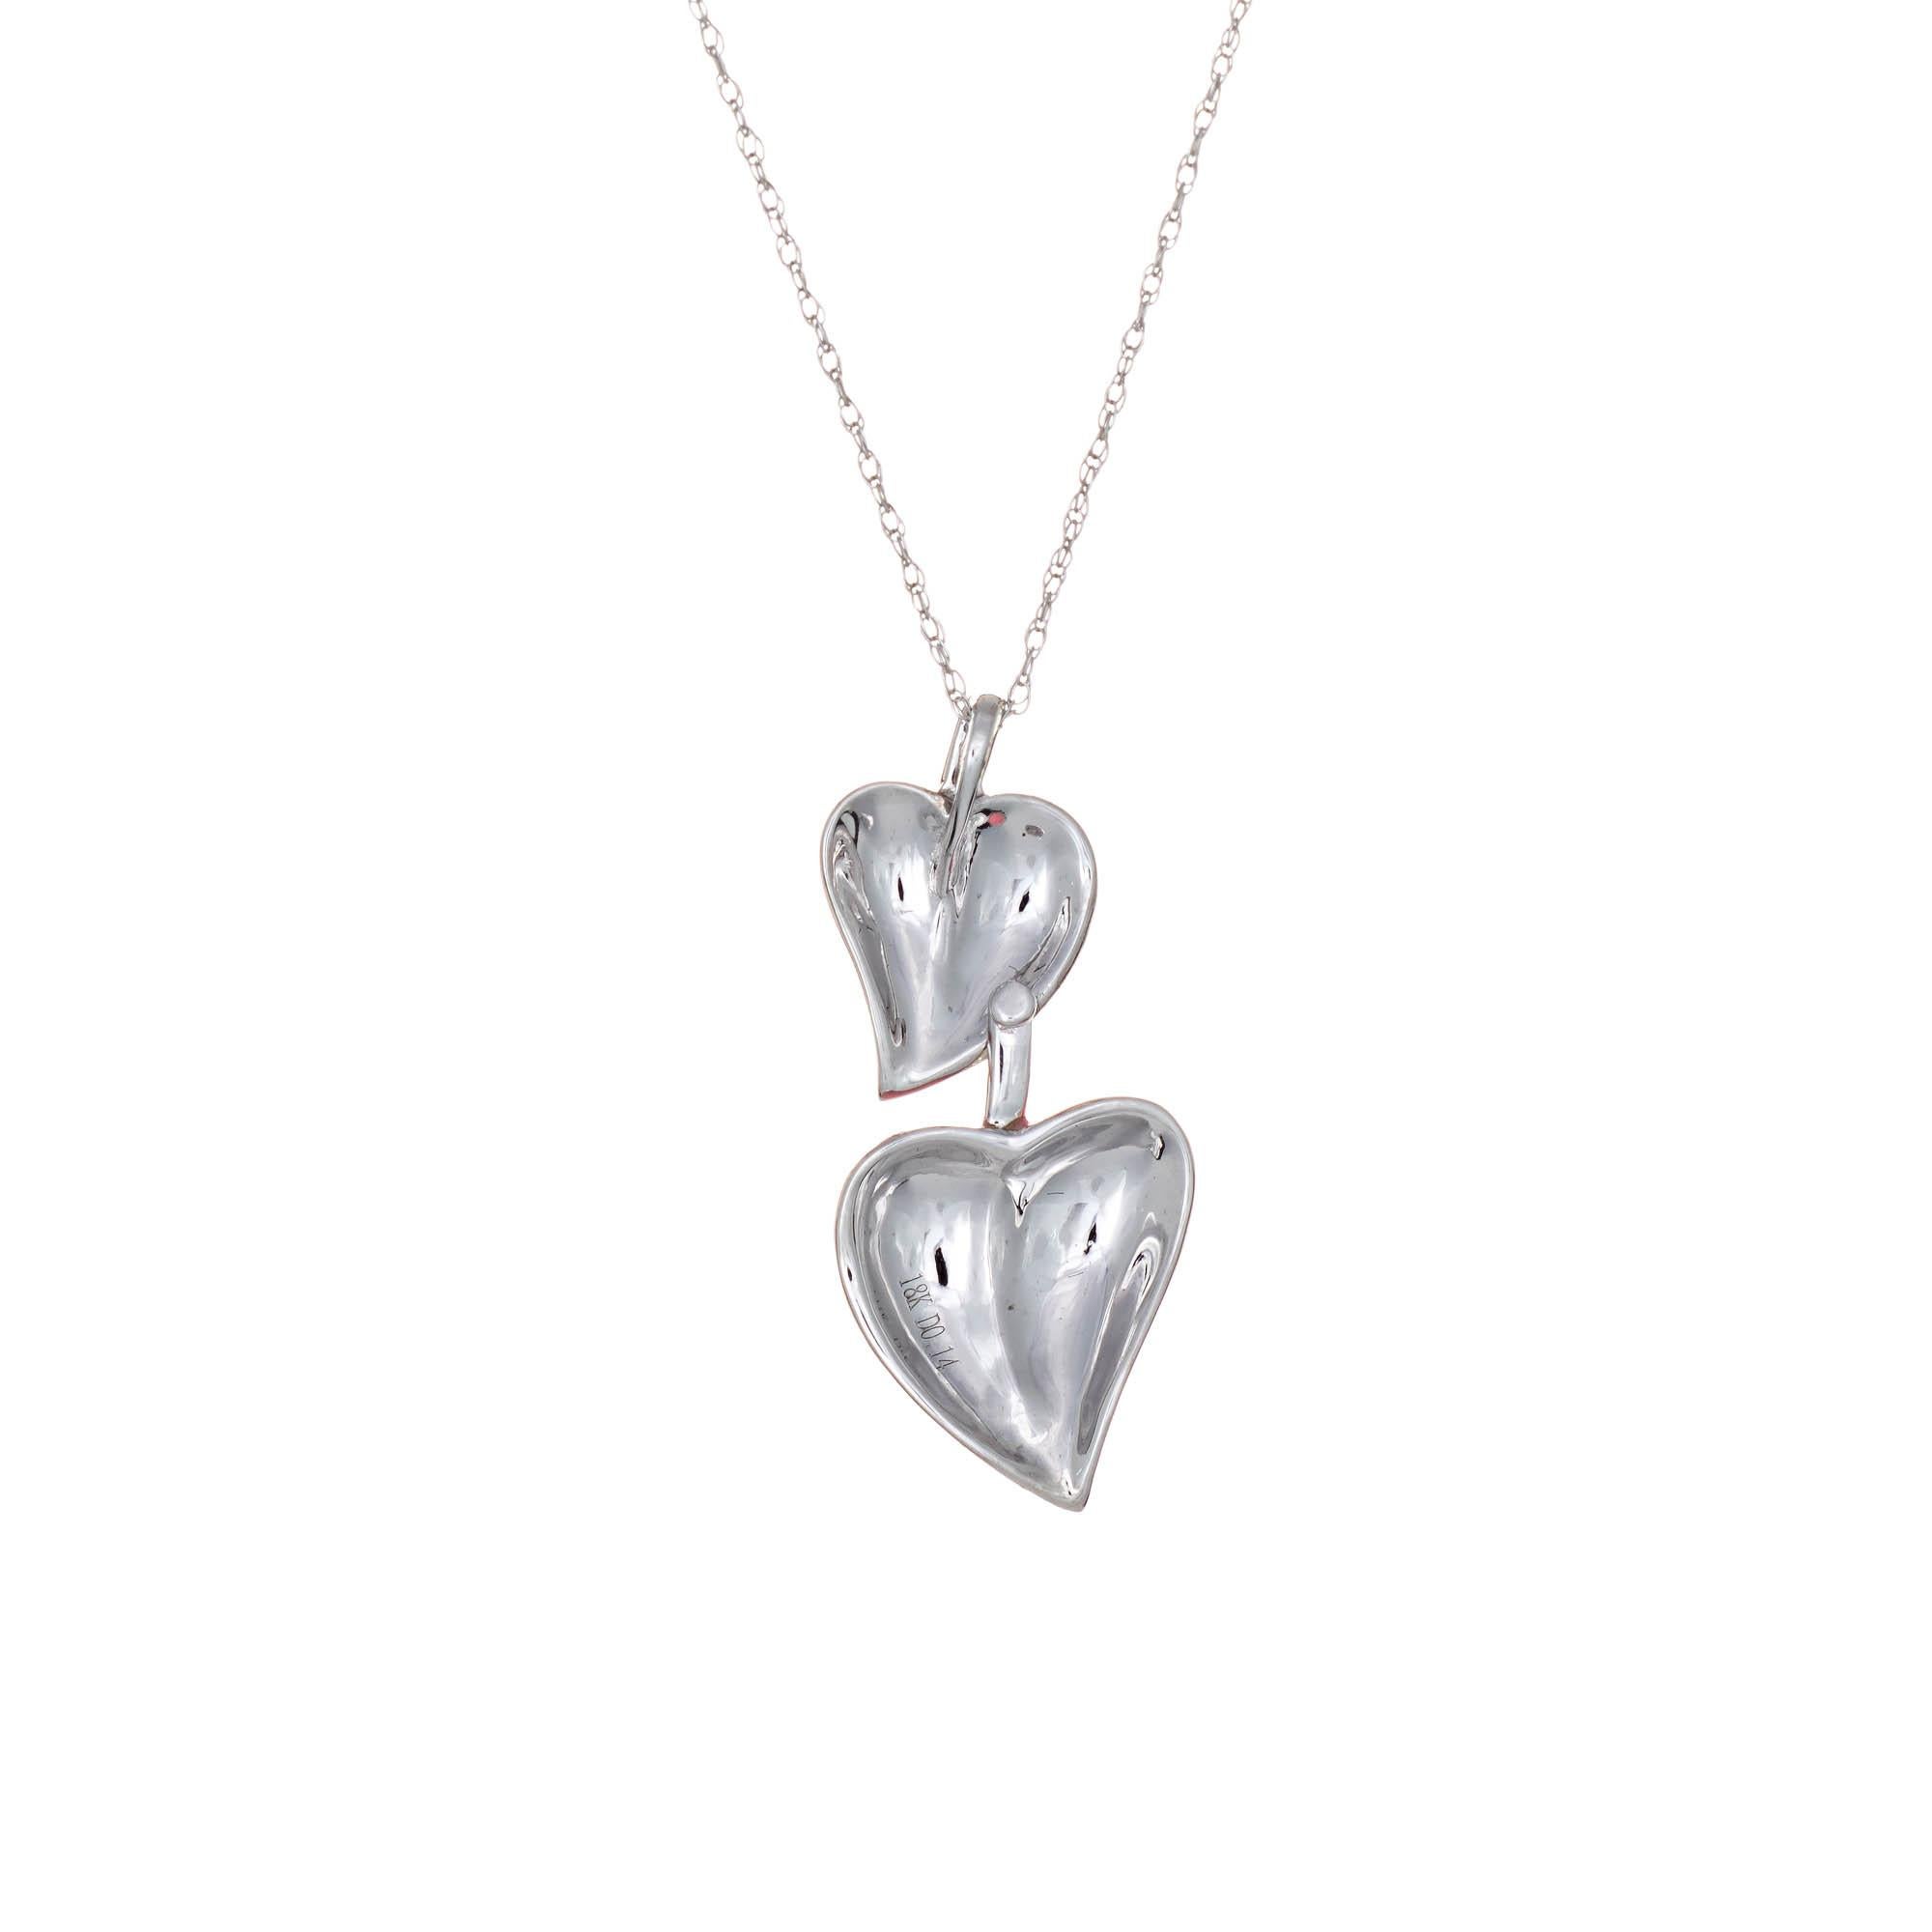 Stylish double heart diamond necklace crafted in 18 karat white gold.  

Diamonds total an estimated 0.14 carats (estimated at G-H color and SI1 clarity). 

The double heart design features a smaller heart set with orange enamel and the larger heart